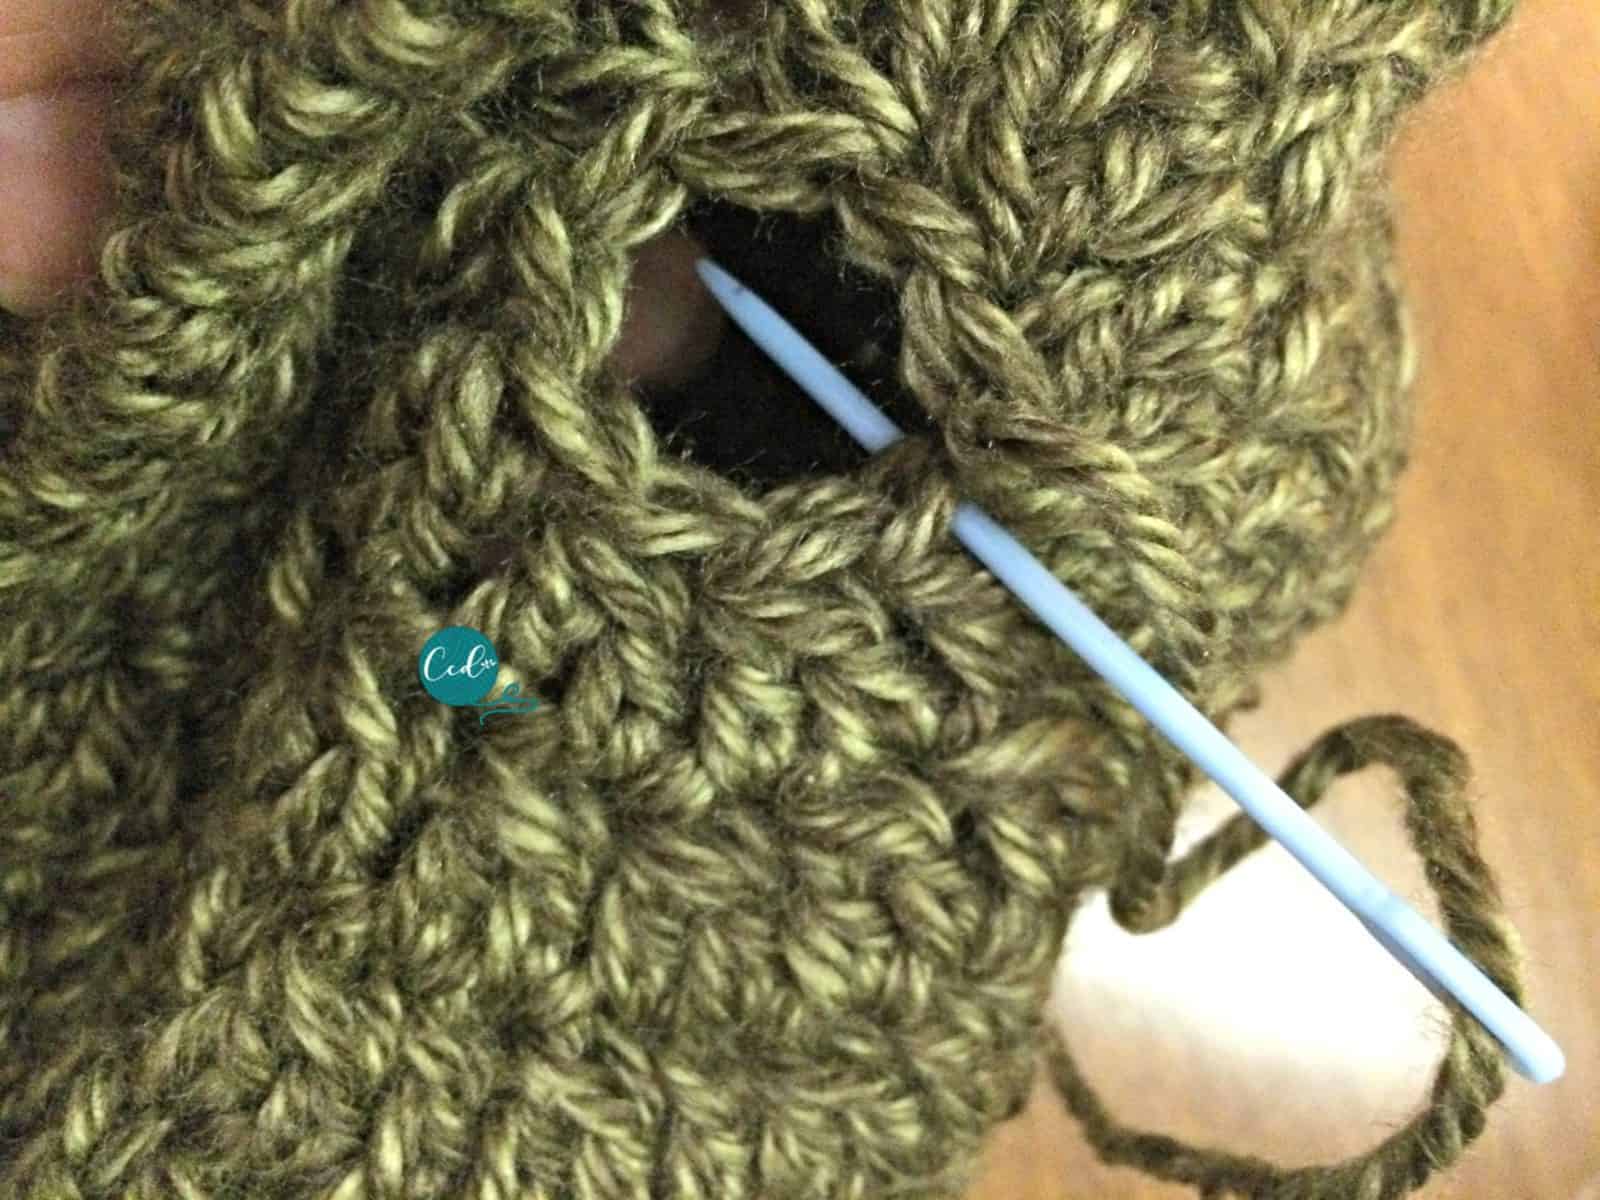 Insert yarn needle in stitches to close slouchy hat.